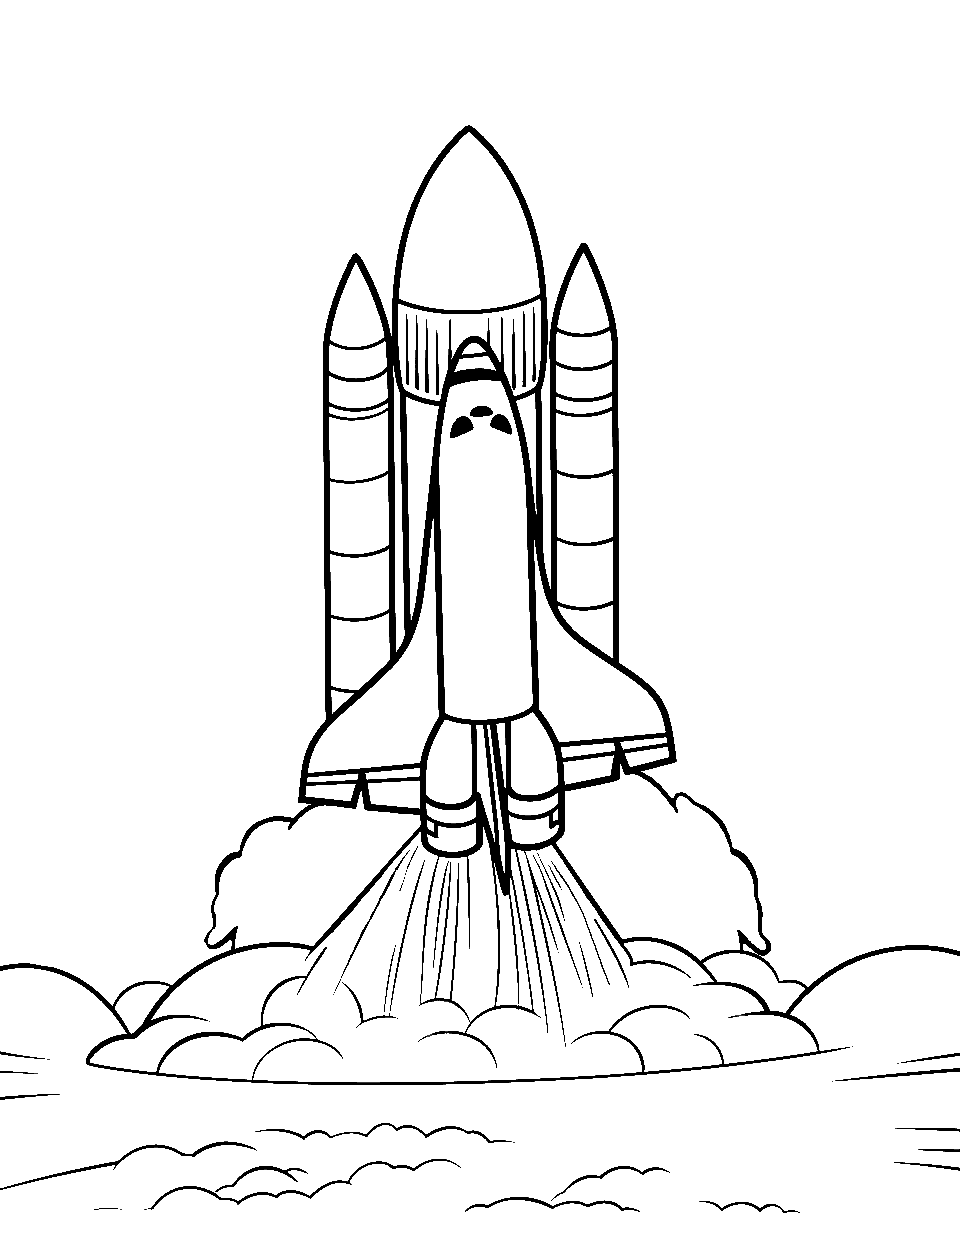 Spaceshuttle's Smooth Takeoff Coloring Page - A space shuttle preparing to take off.